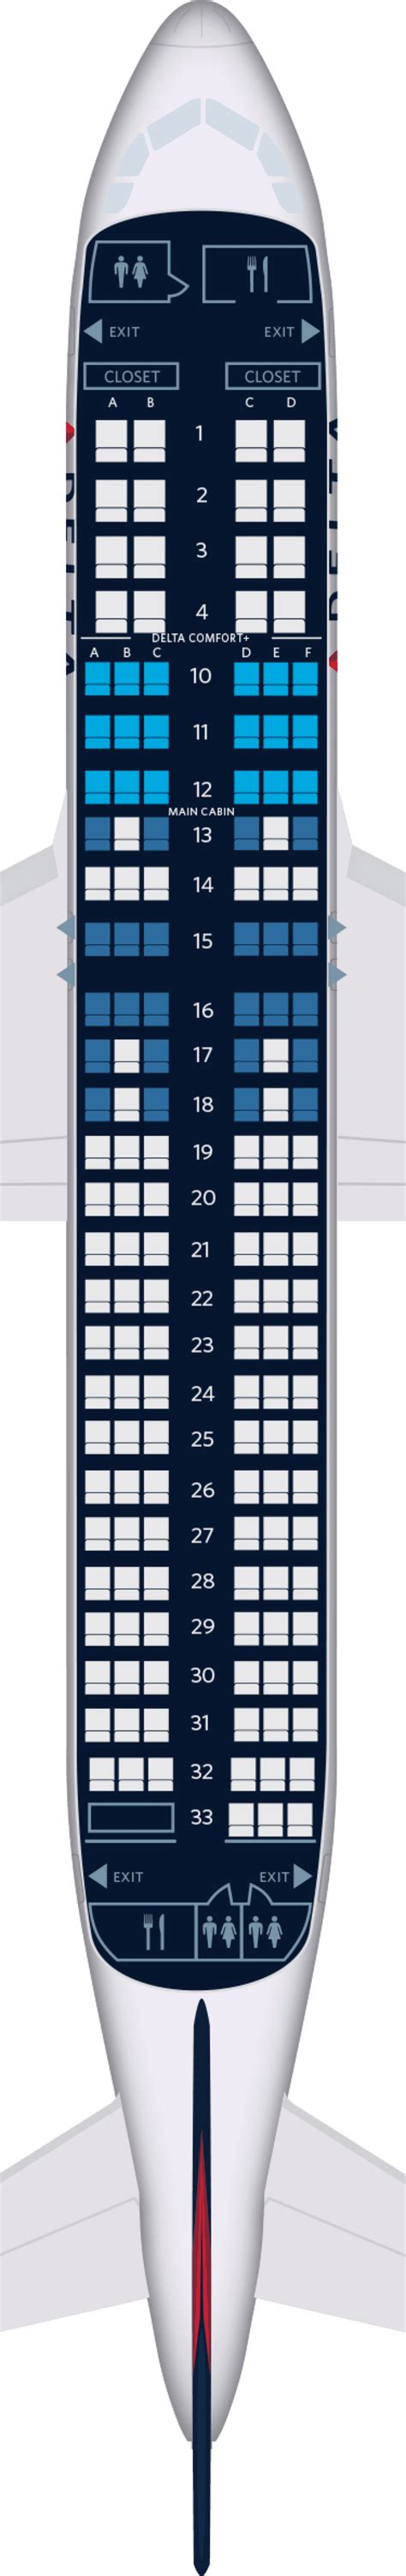 Economy. Seats 177. Pitch 29-30". Width 18". Recline 3". On the Airbus A320-200 V.3, British Airways offers an economy class that's tailored for long-haul comfort. Designed for 177 passengers, the cabin is spacious and well-appointed, ensuring a pleasant flight experience. The seating is optimized for relaxation, and a plethora of entertainment .... 